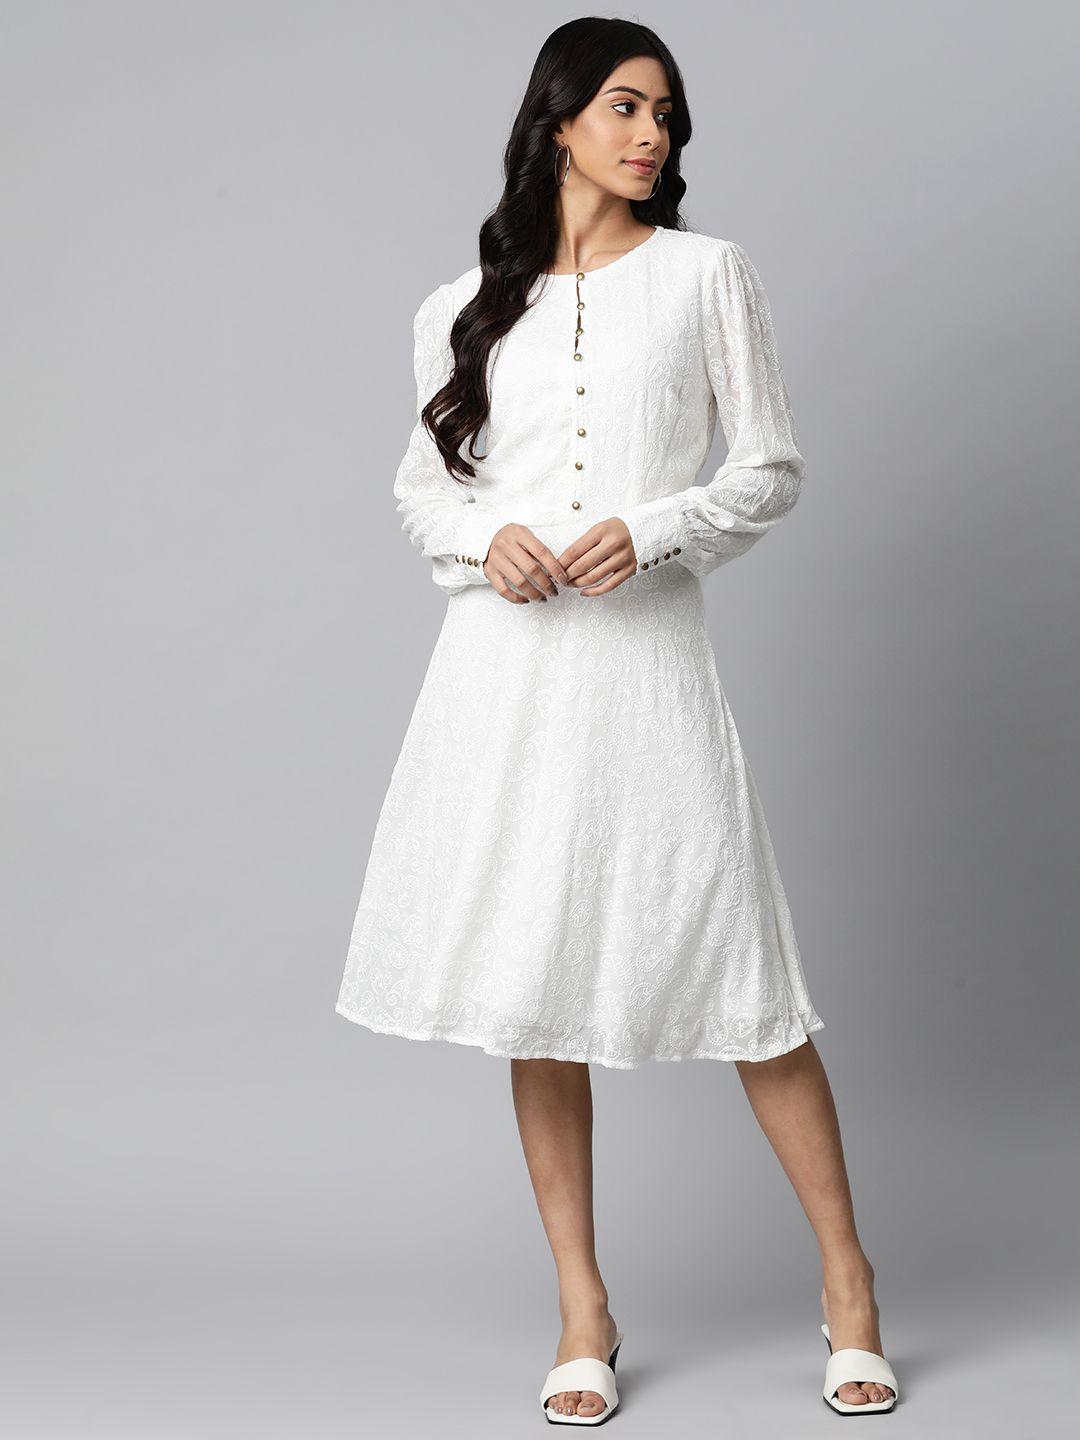 marks & spencer off white ethnic motifs embroidered a-line midi dress